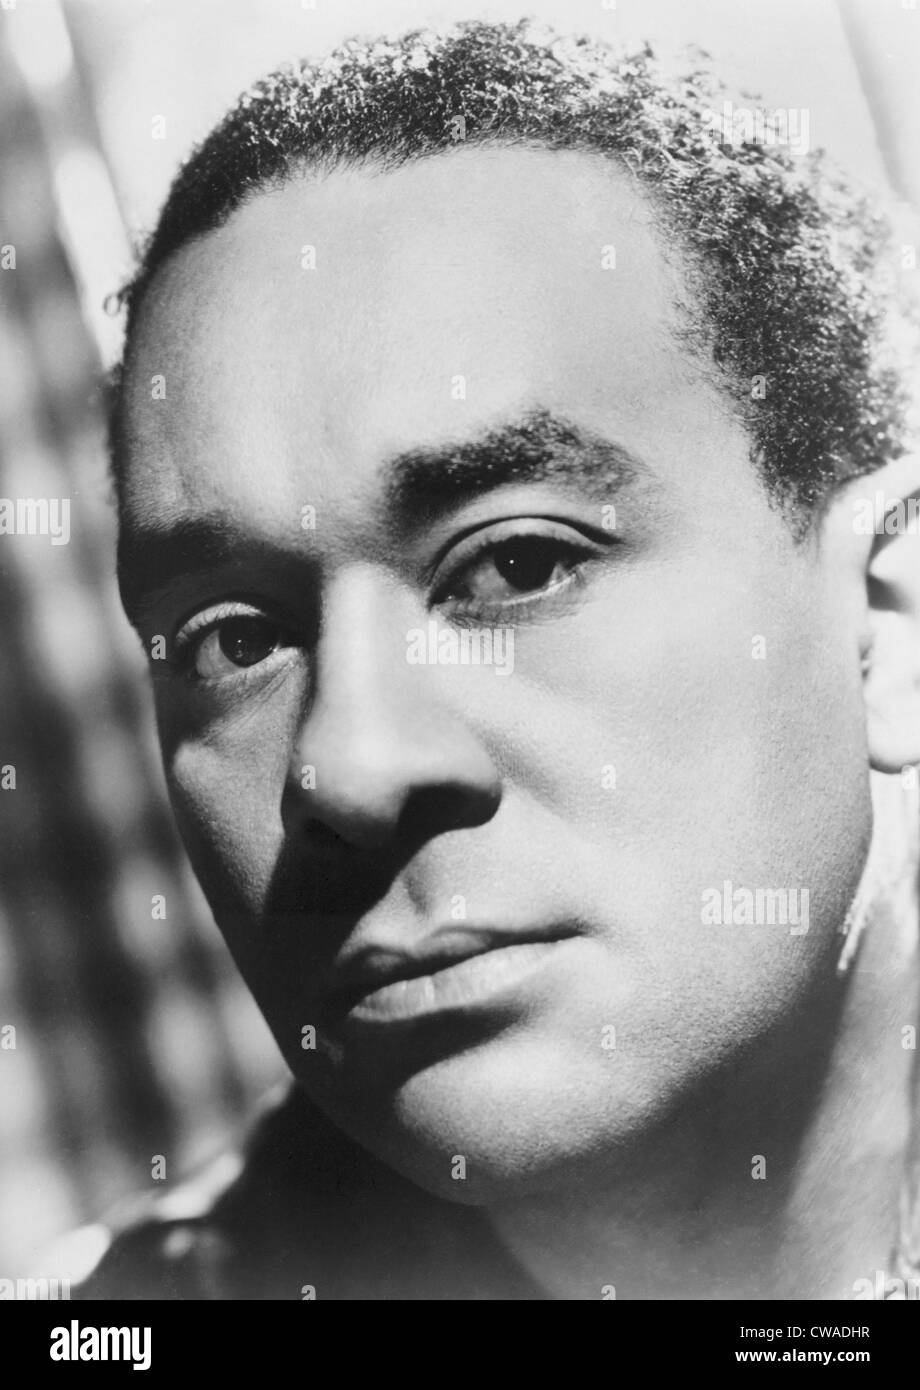 Richard Wright (1908-1960), 1951 portrait of African-American novelist during his years as an expatriate in Paris.  In 1953 he Stock Photo